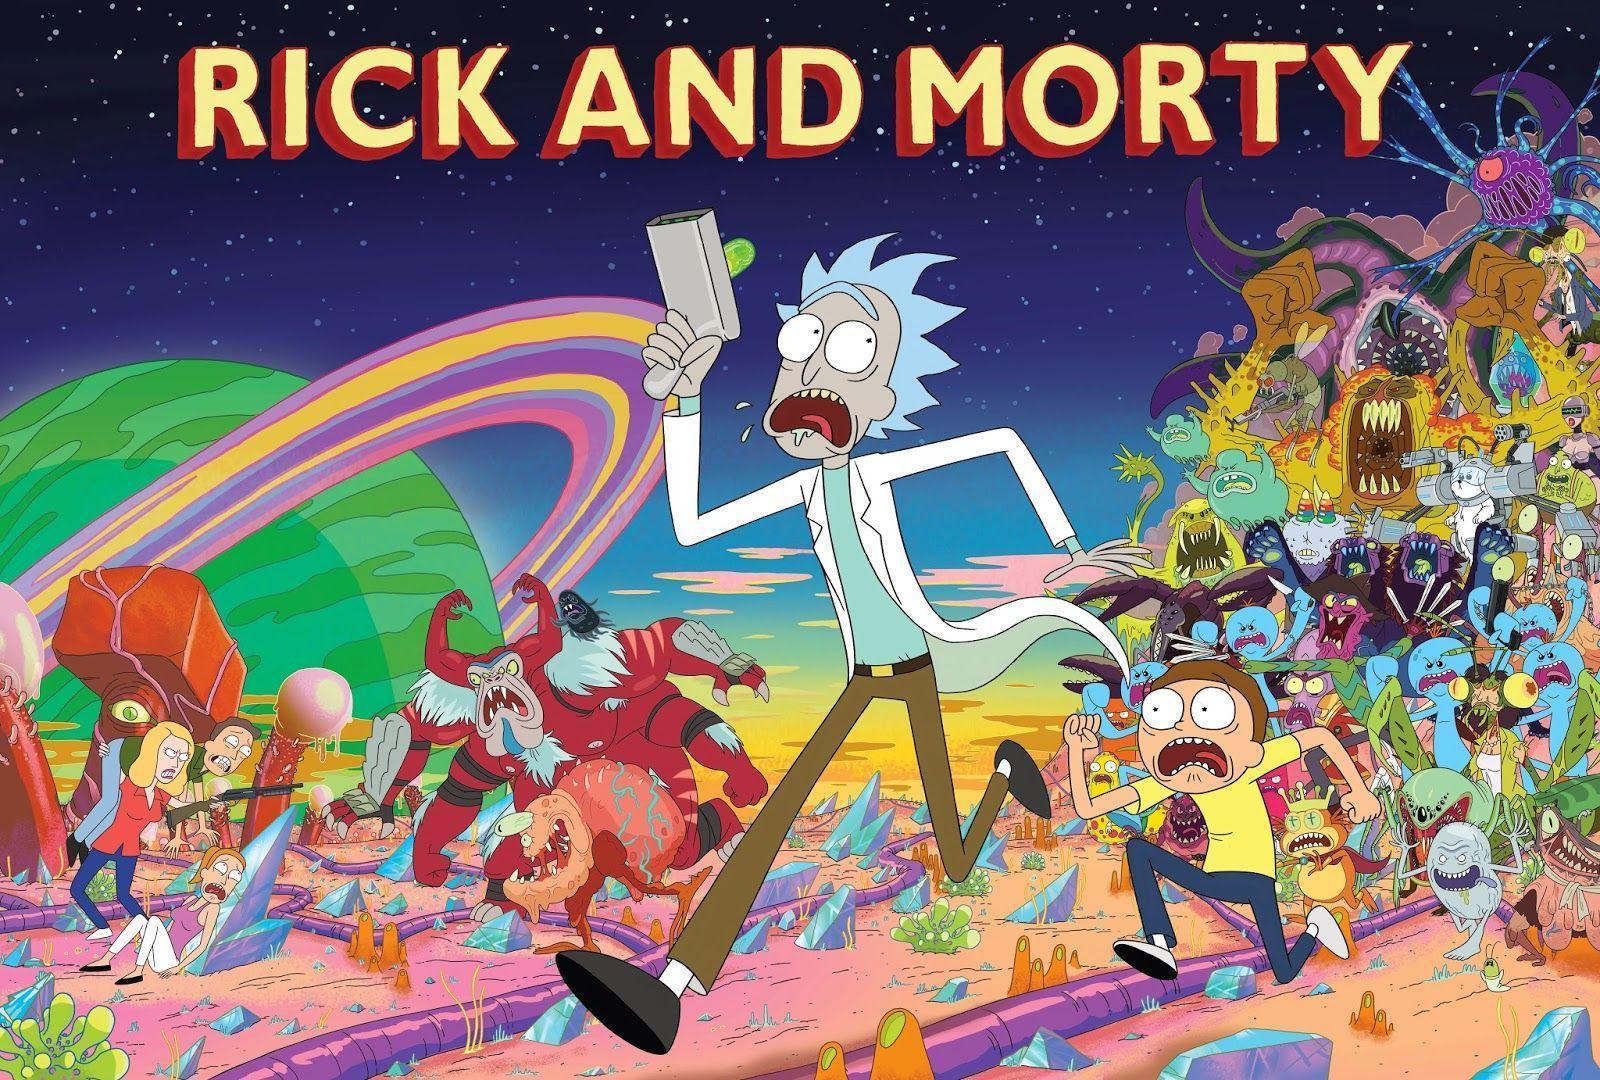 Ricky And Morty Season 5 Episode 11 Release Date, And Spoilers